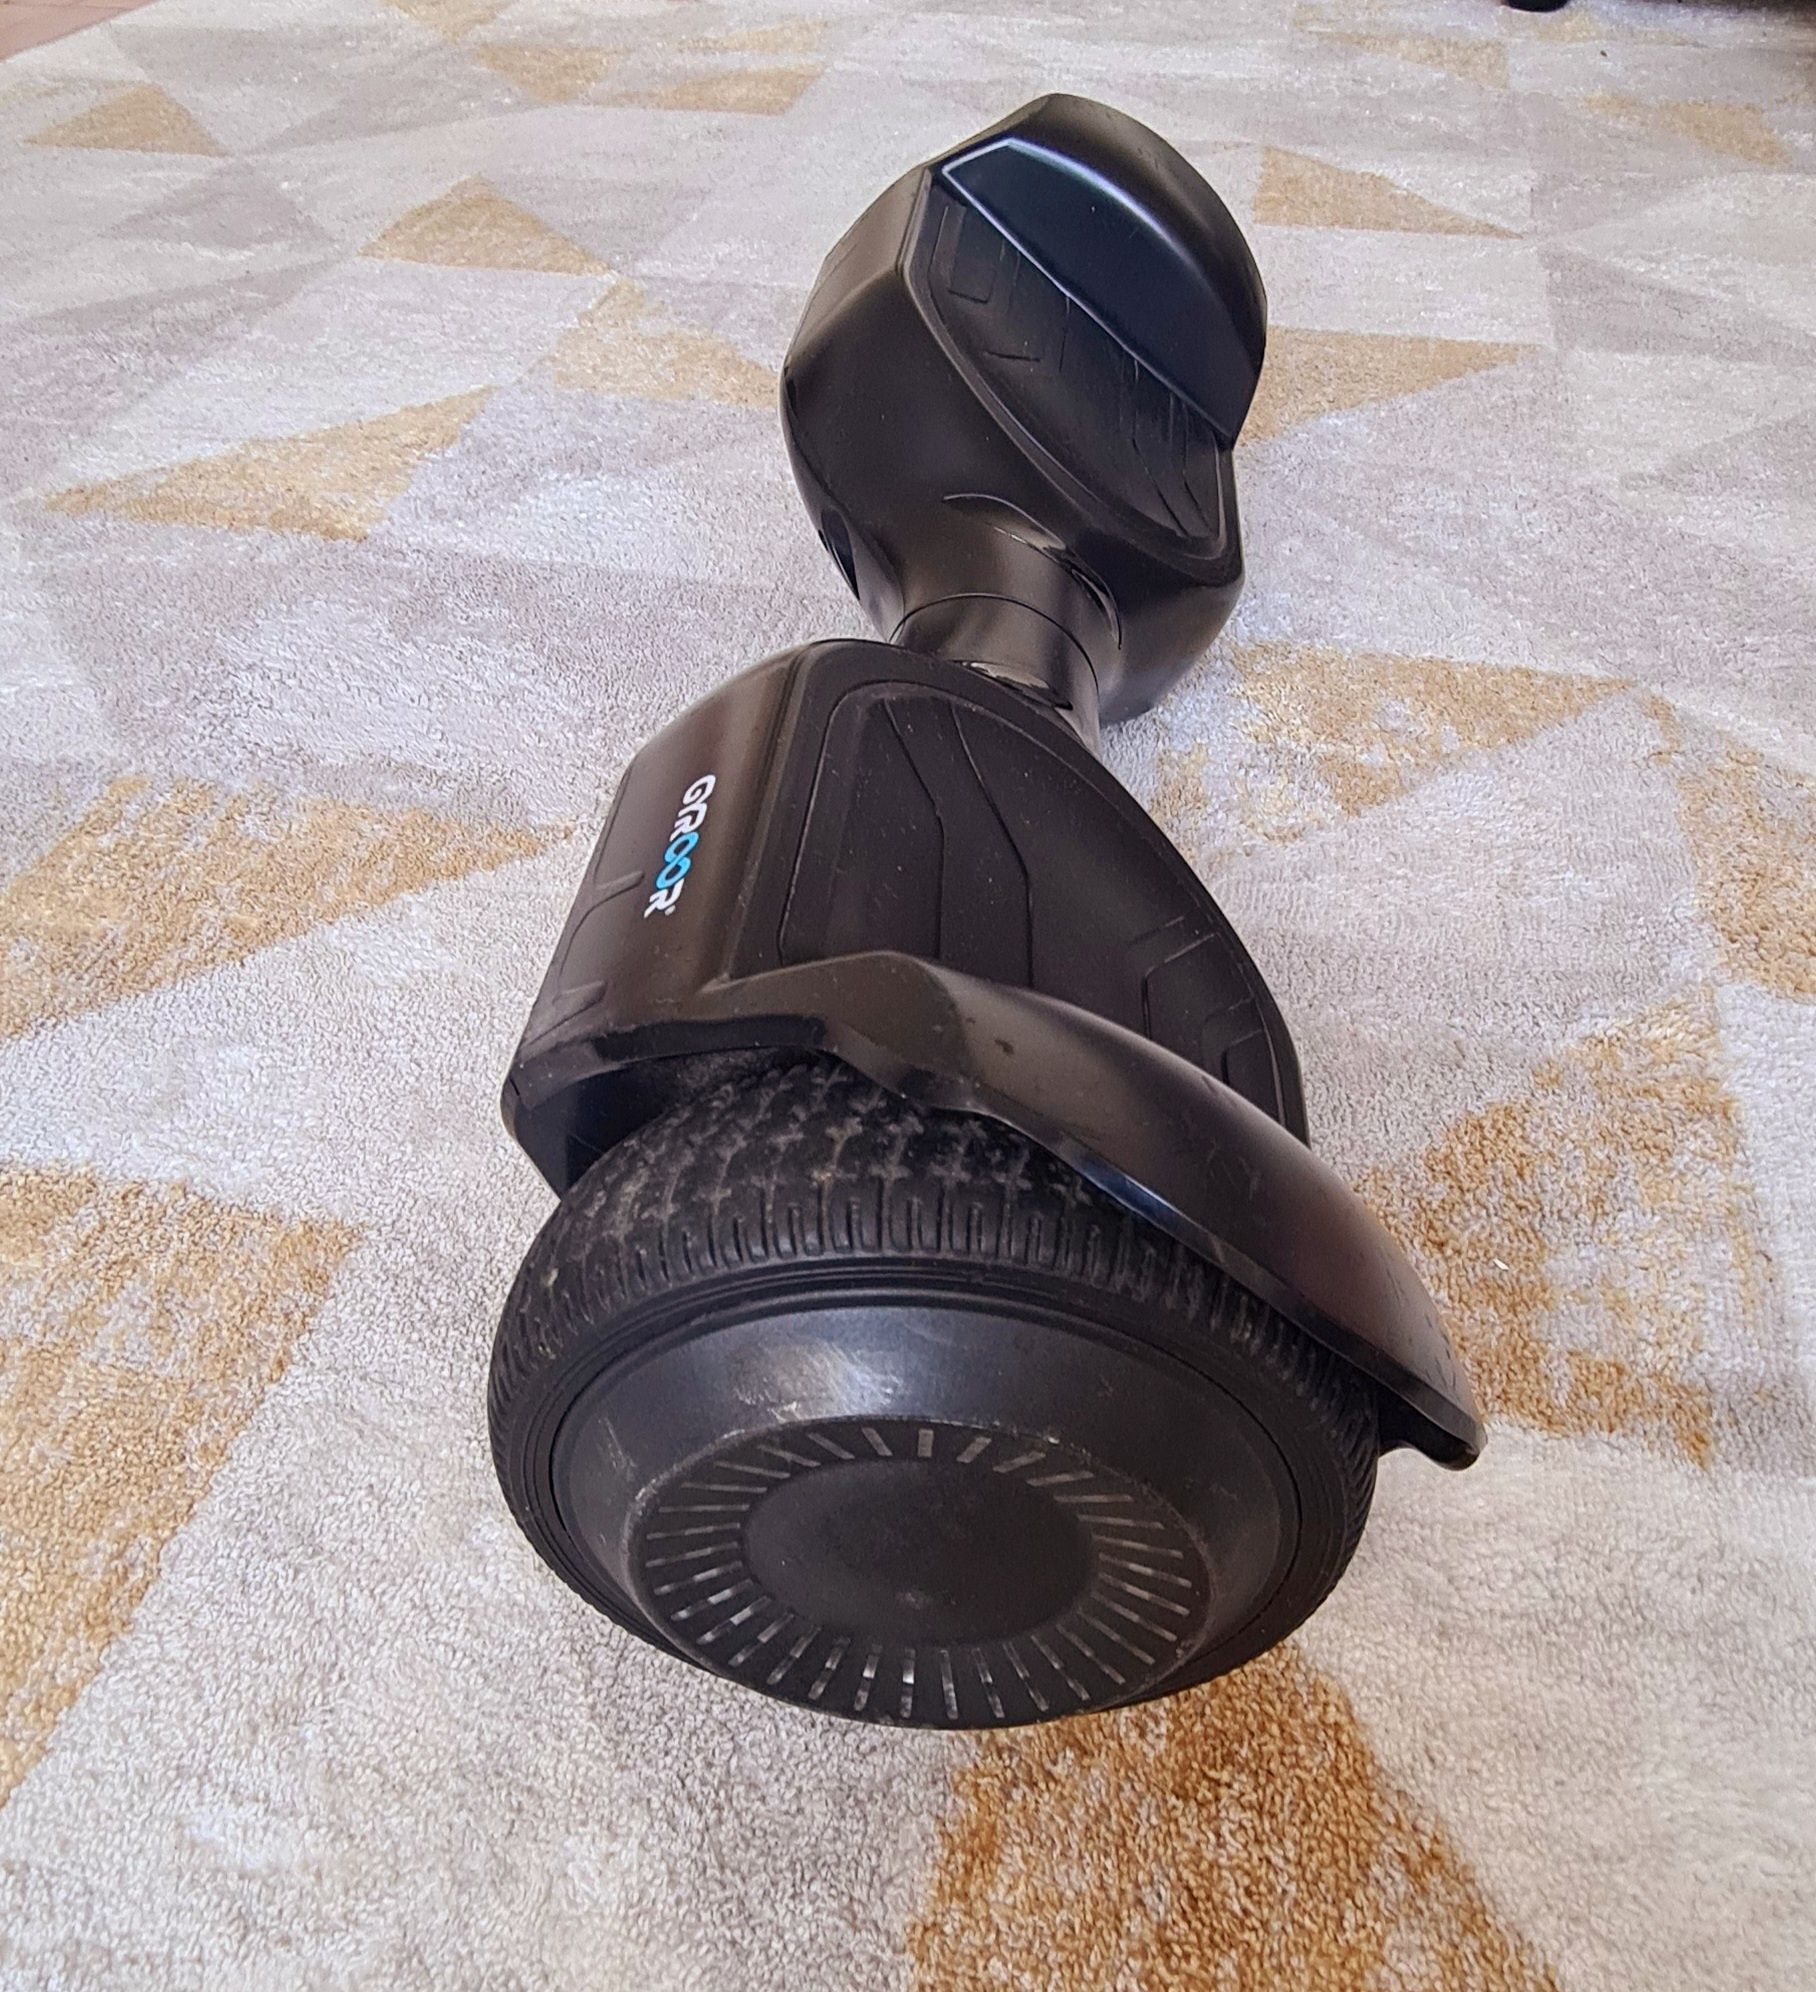 Hoverbord Gyroor Led 6.5